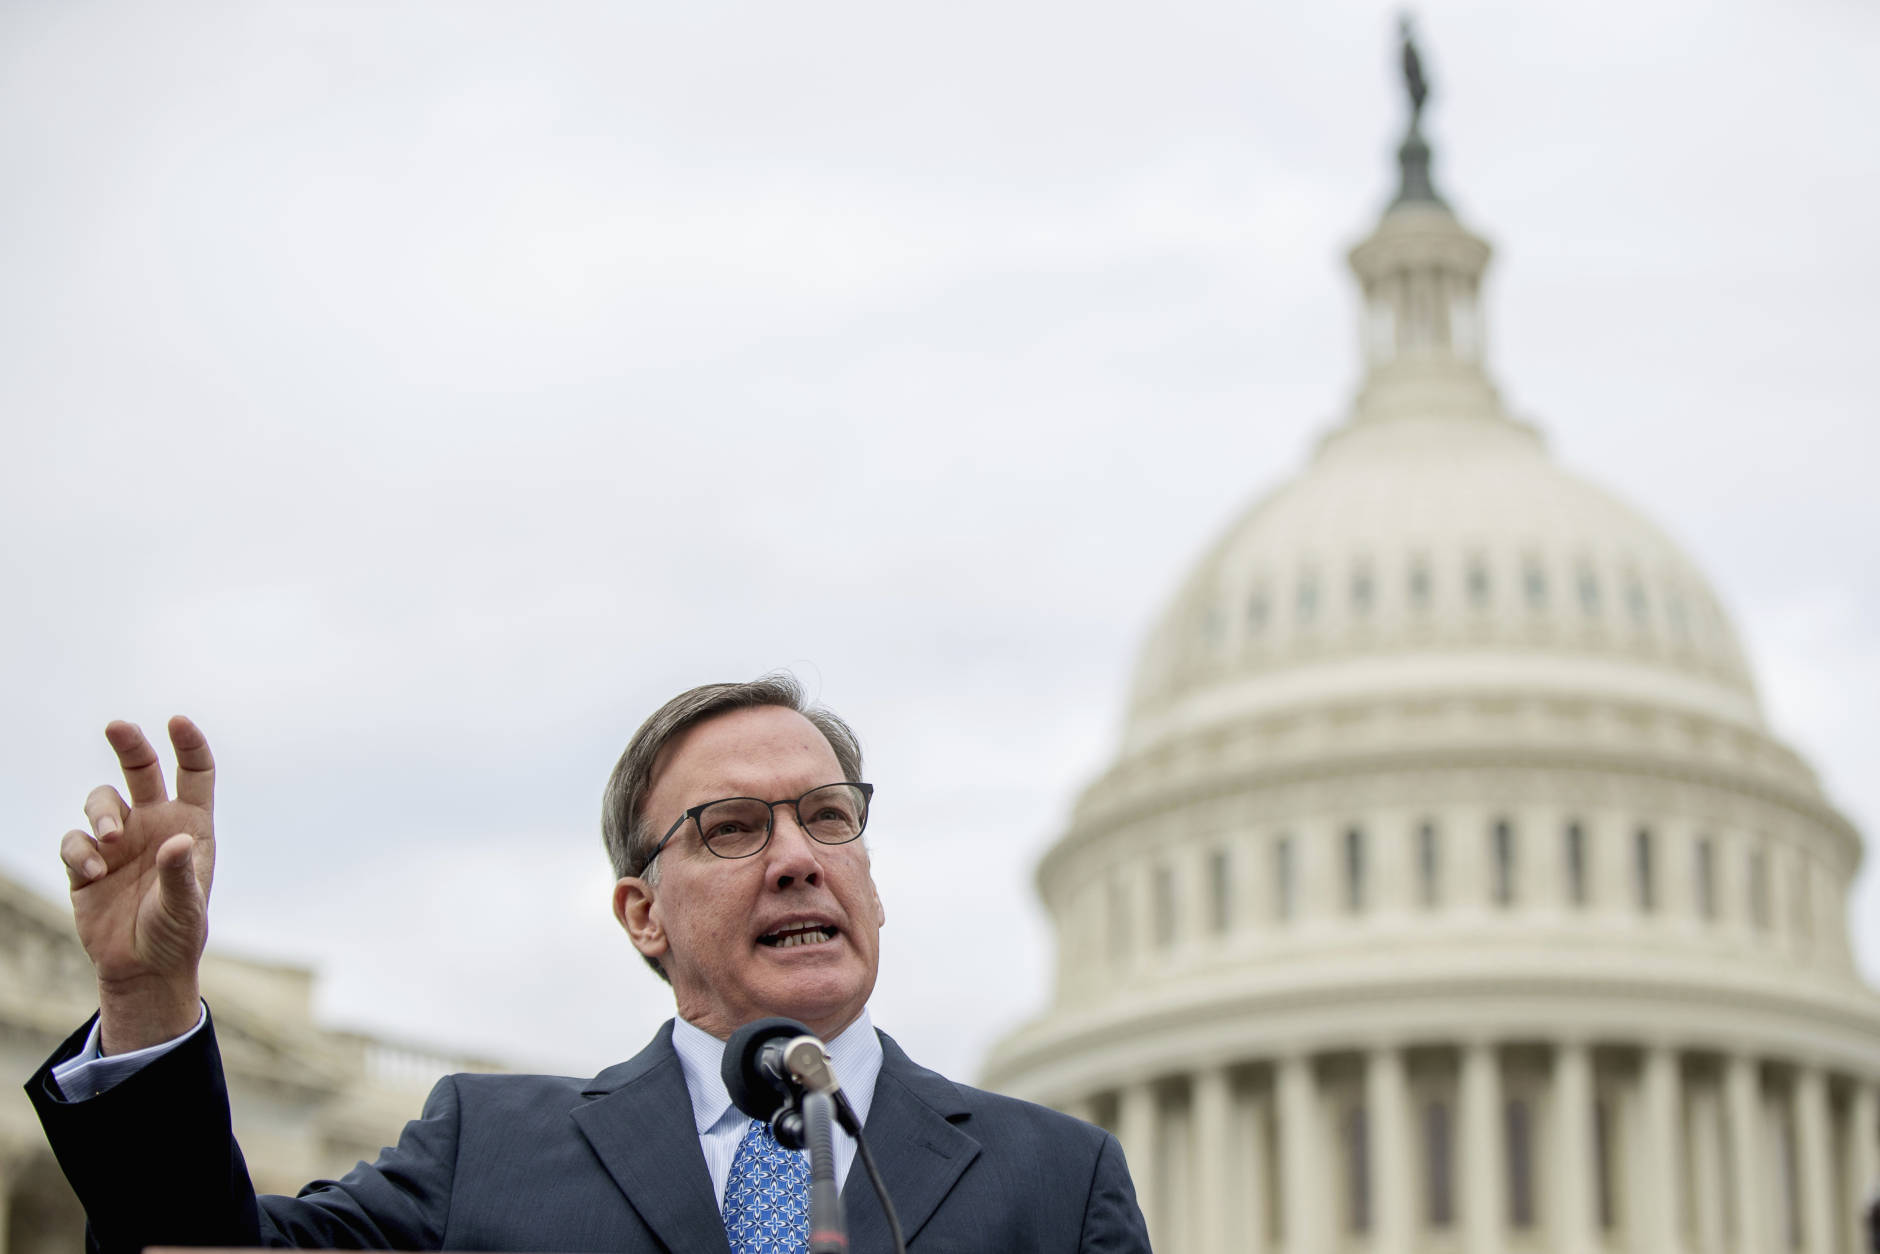 Architect of the Capitol Stephen T. Ayers speaks at a news conference on Capitol Hill in Washington, Tuesday, Nov. 15, 2016, to announce the successful completion of the U.S. Capitol Dome Restoration Project. (AP Photo/Andrew Harnik)